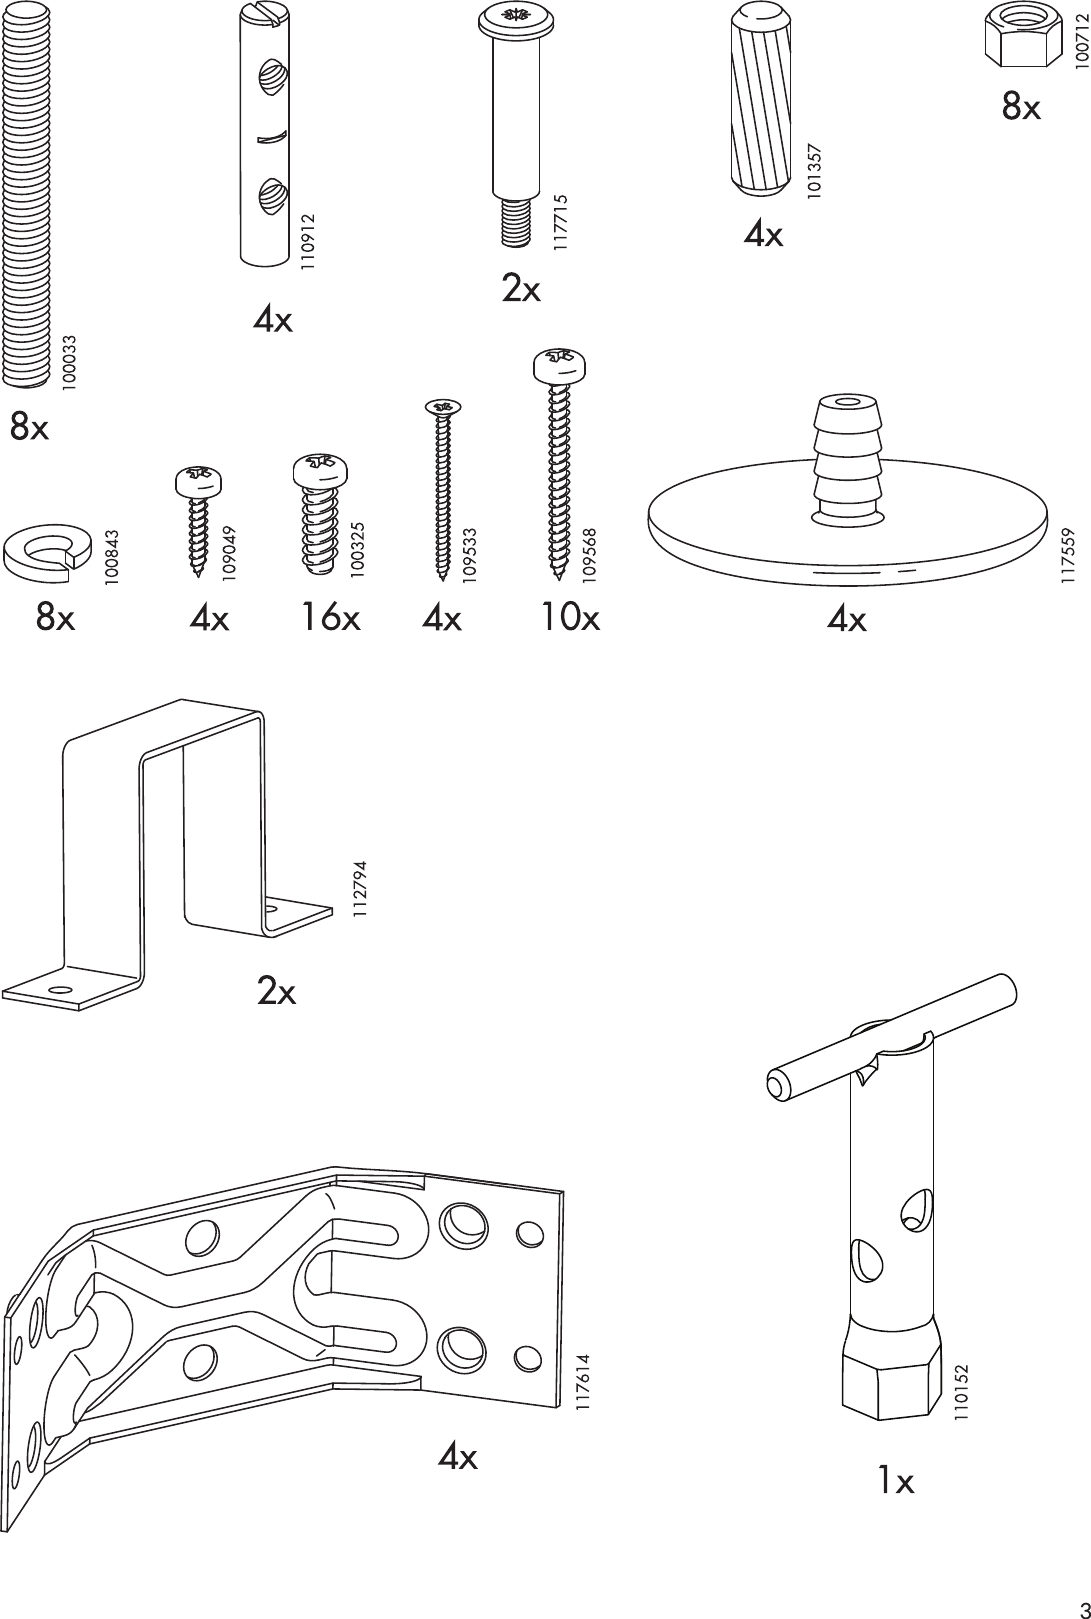 Page 3 of 12 - Ikea Ikea-Bjursta-Extendable-Dining-Table-20-28-35-X35-Assembly-Instruction